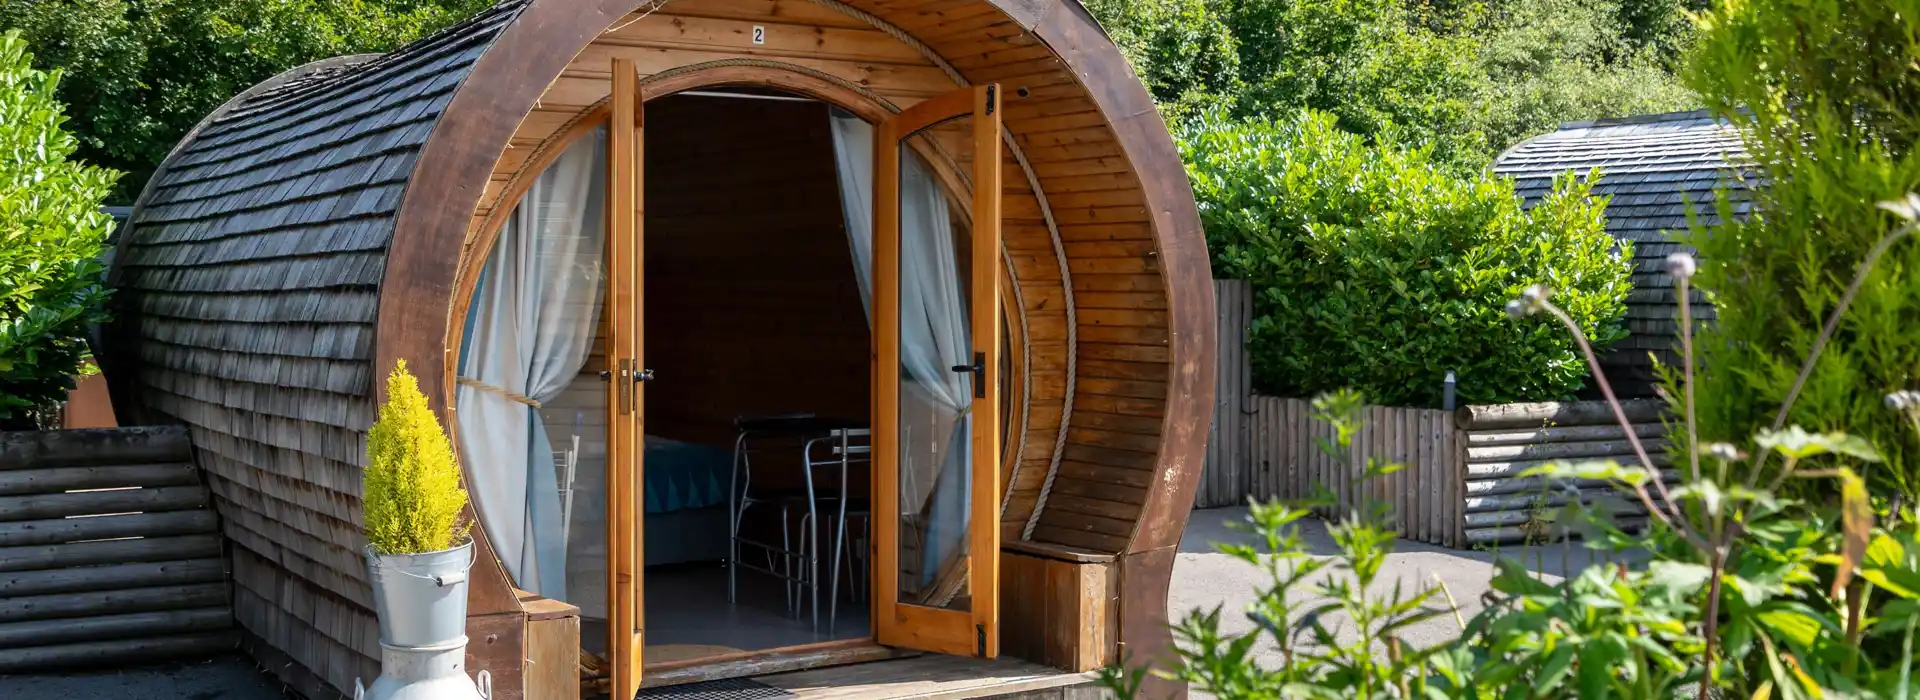 Camping and glamping pods in Buxton